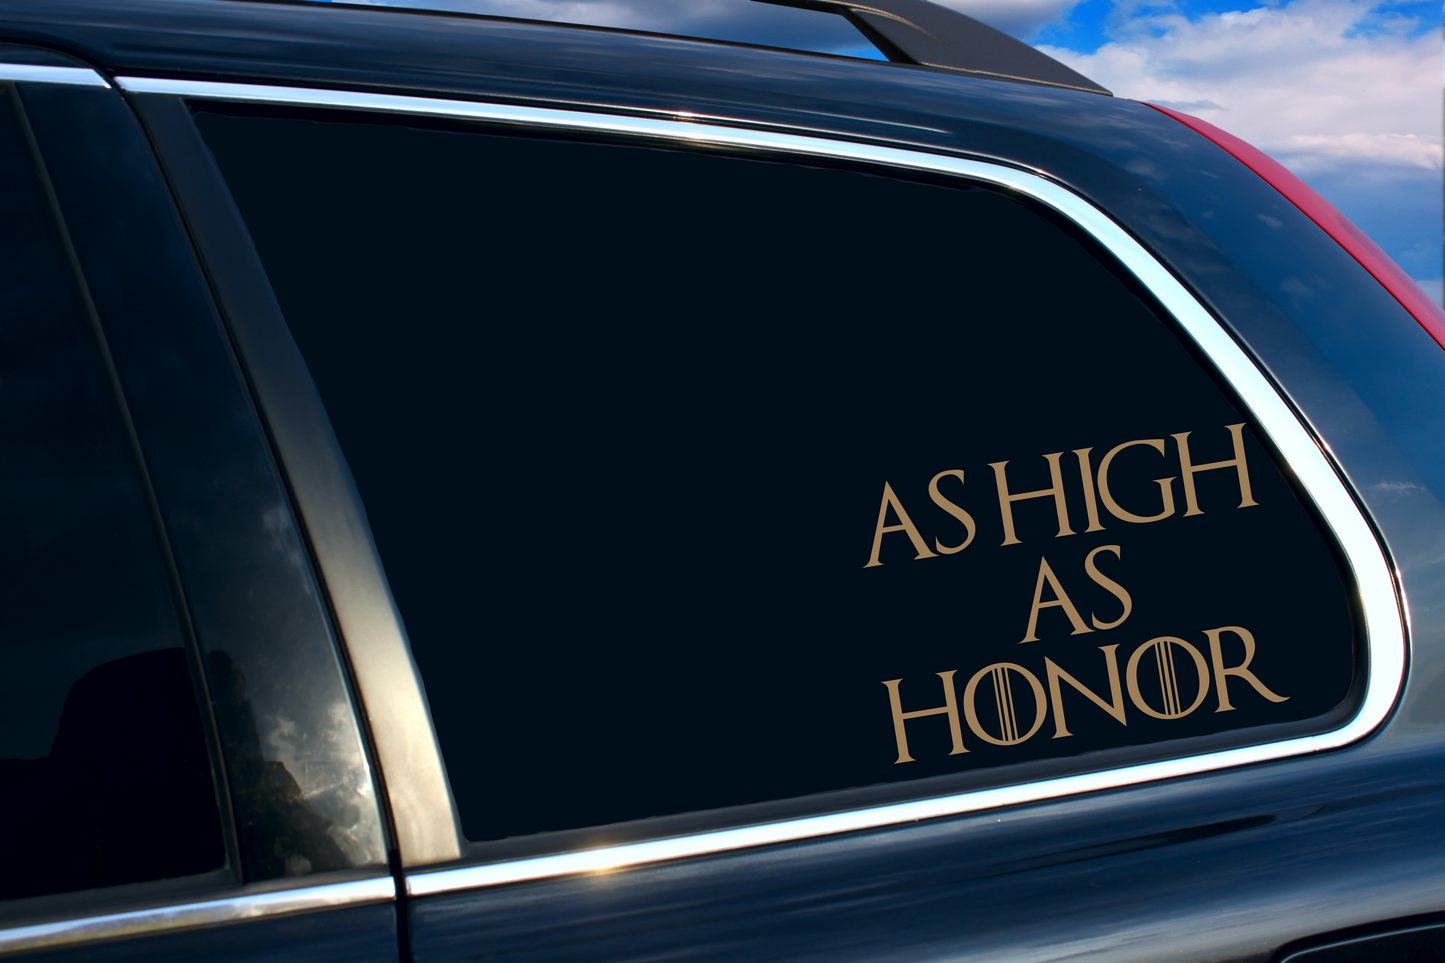 Vinyl Decal | GoT Inspired Falcon/As High As Honor| Cars, Laptops, Etc